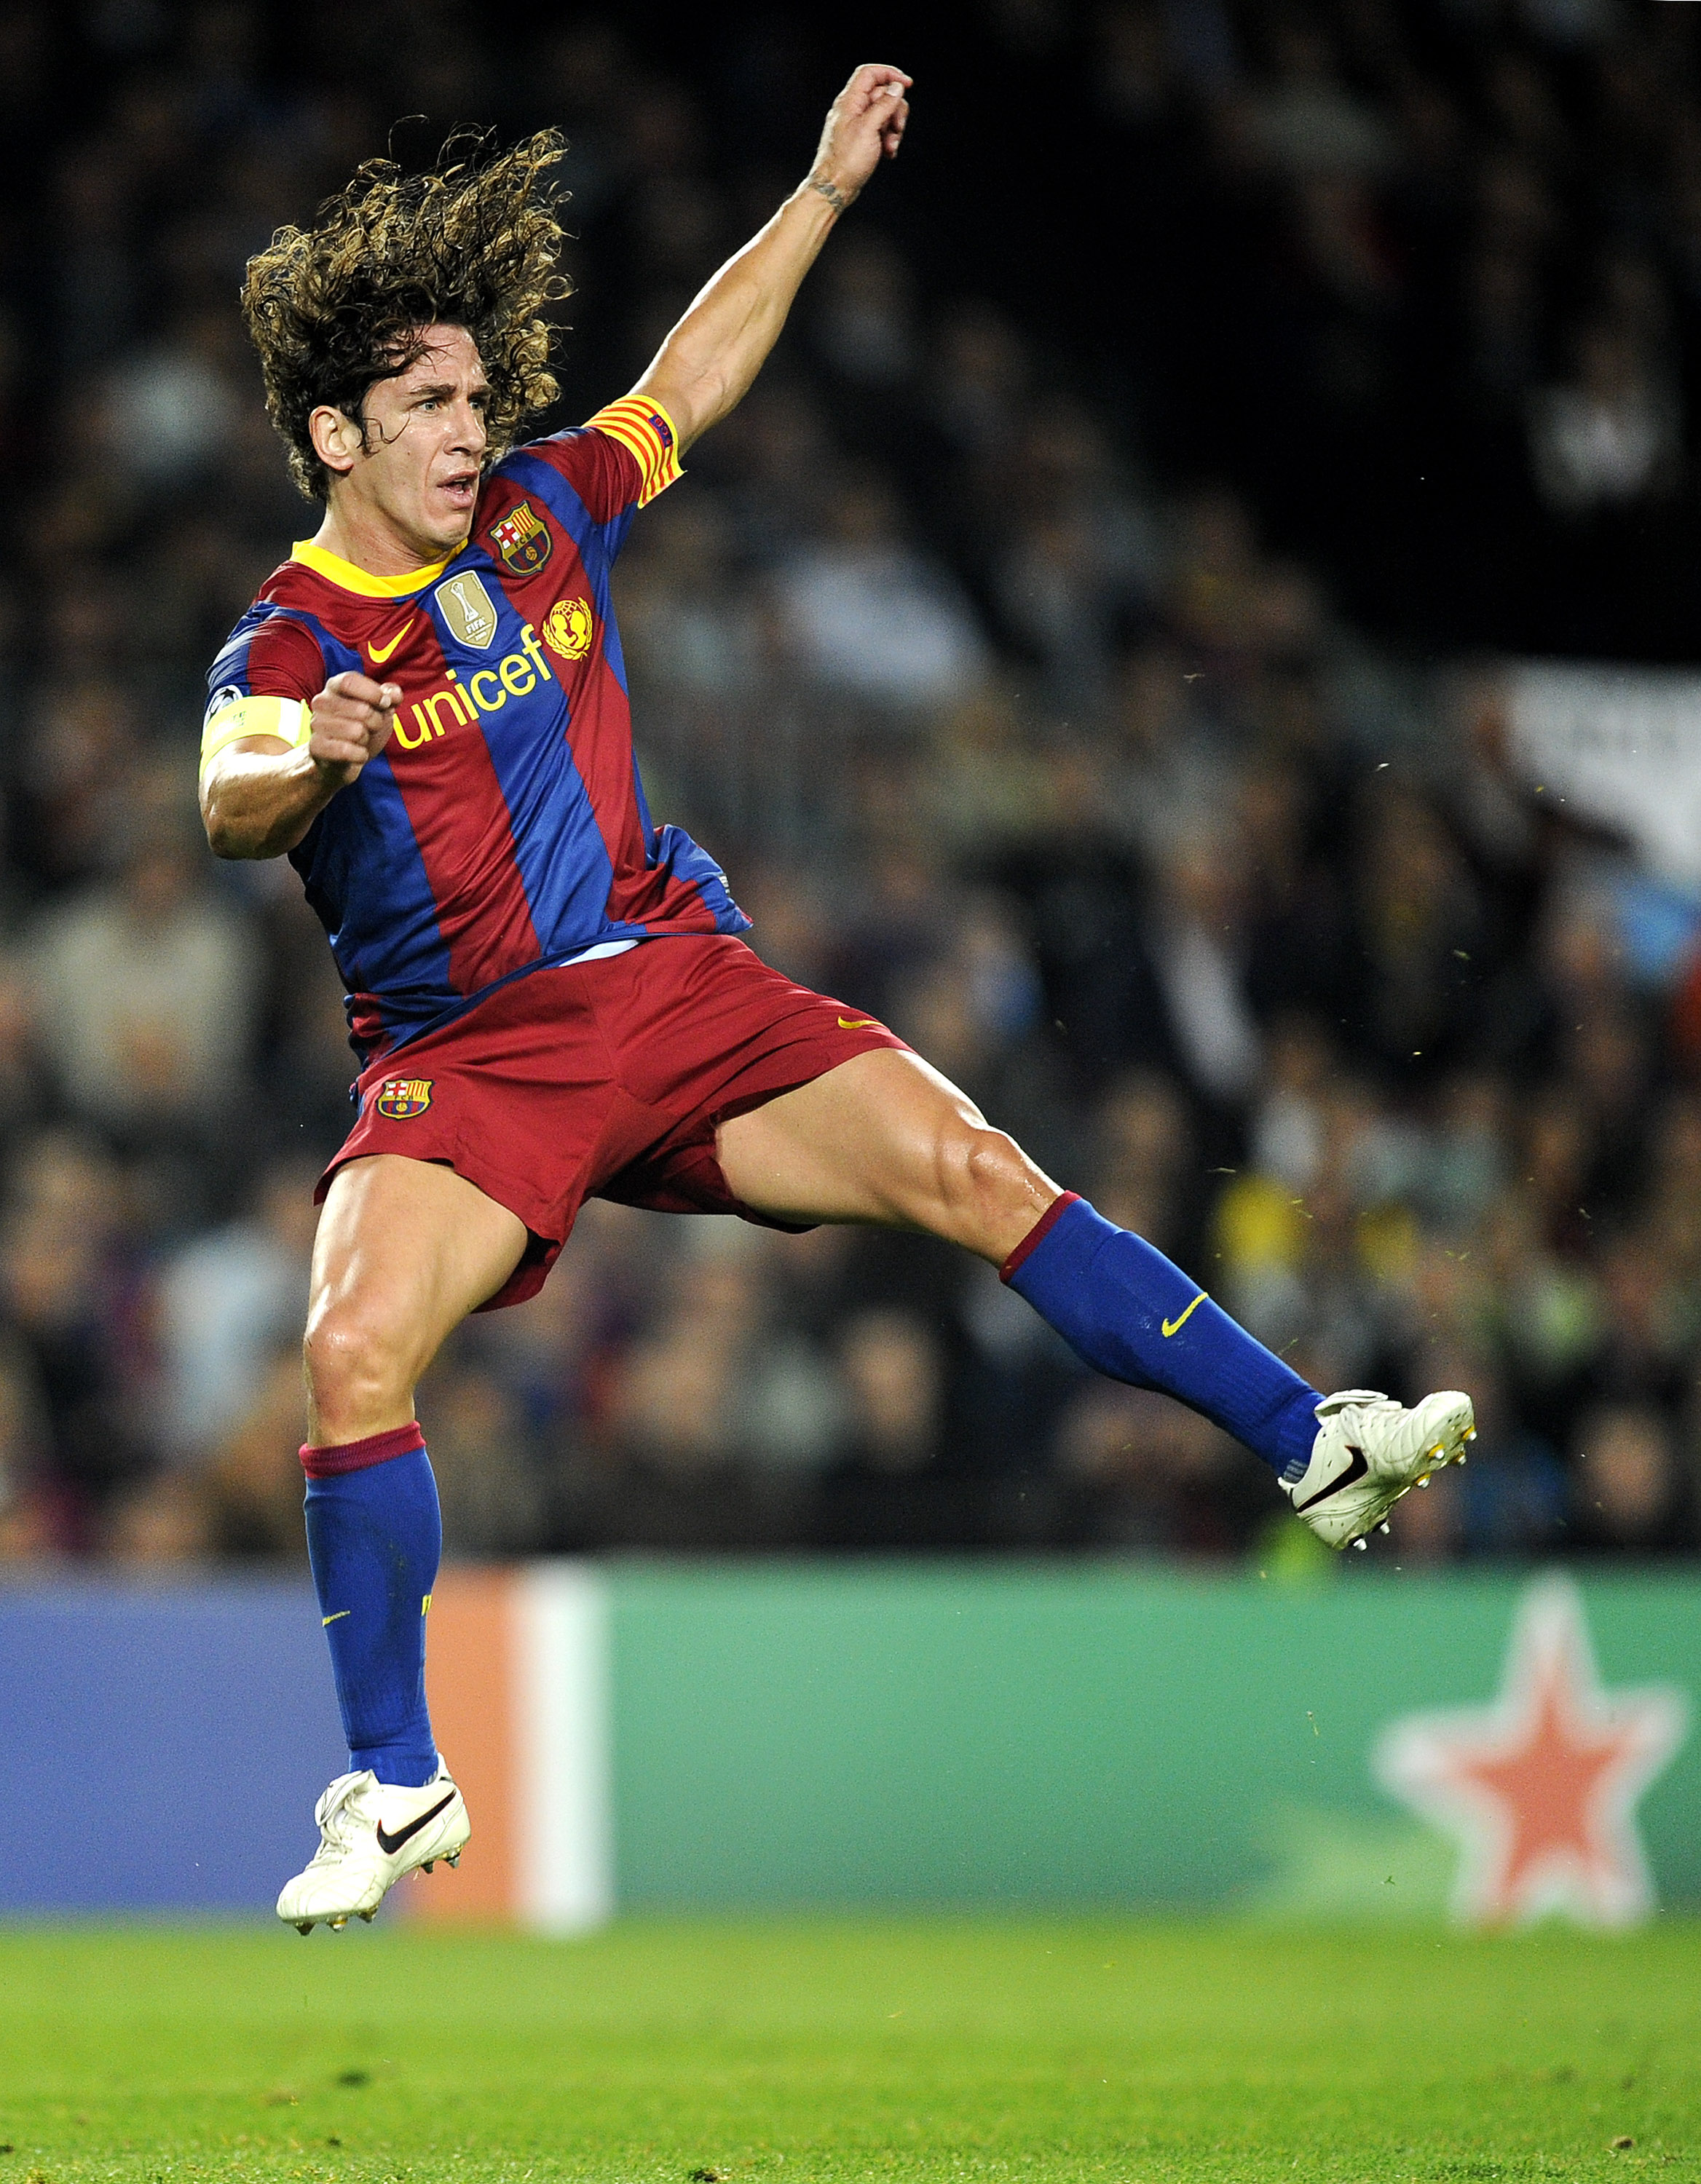 BARCELONA, SPAIN - OCTOBER 20:  Carles Puyol of Barcelona jumps after kicking the ball during the UEFA Champions League group D match between Barcelona and FC Copenhagen at the Camp nou stadium on October 20, 2010 in Barcelona, Spain. Barcelona won the ma